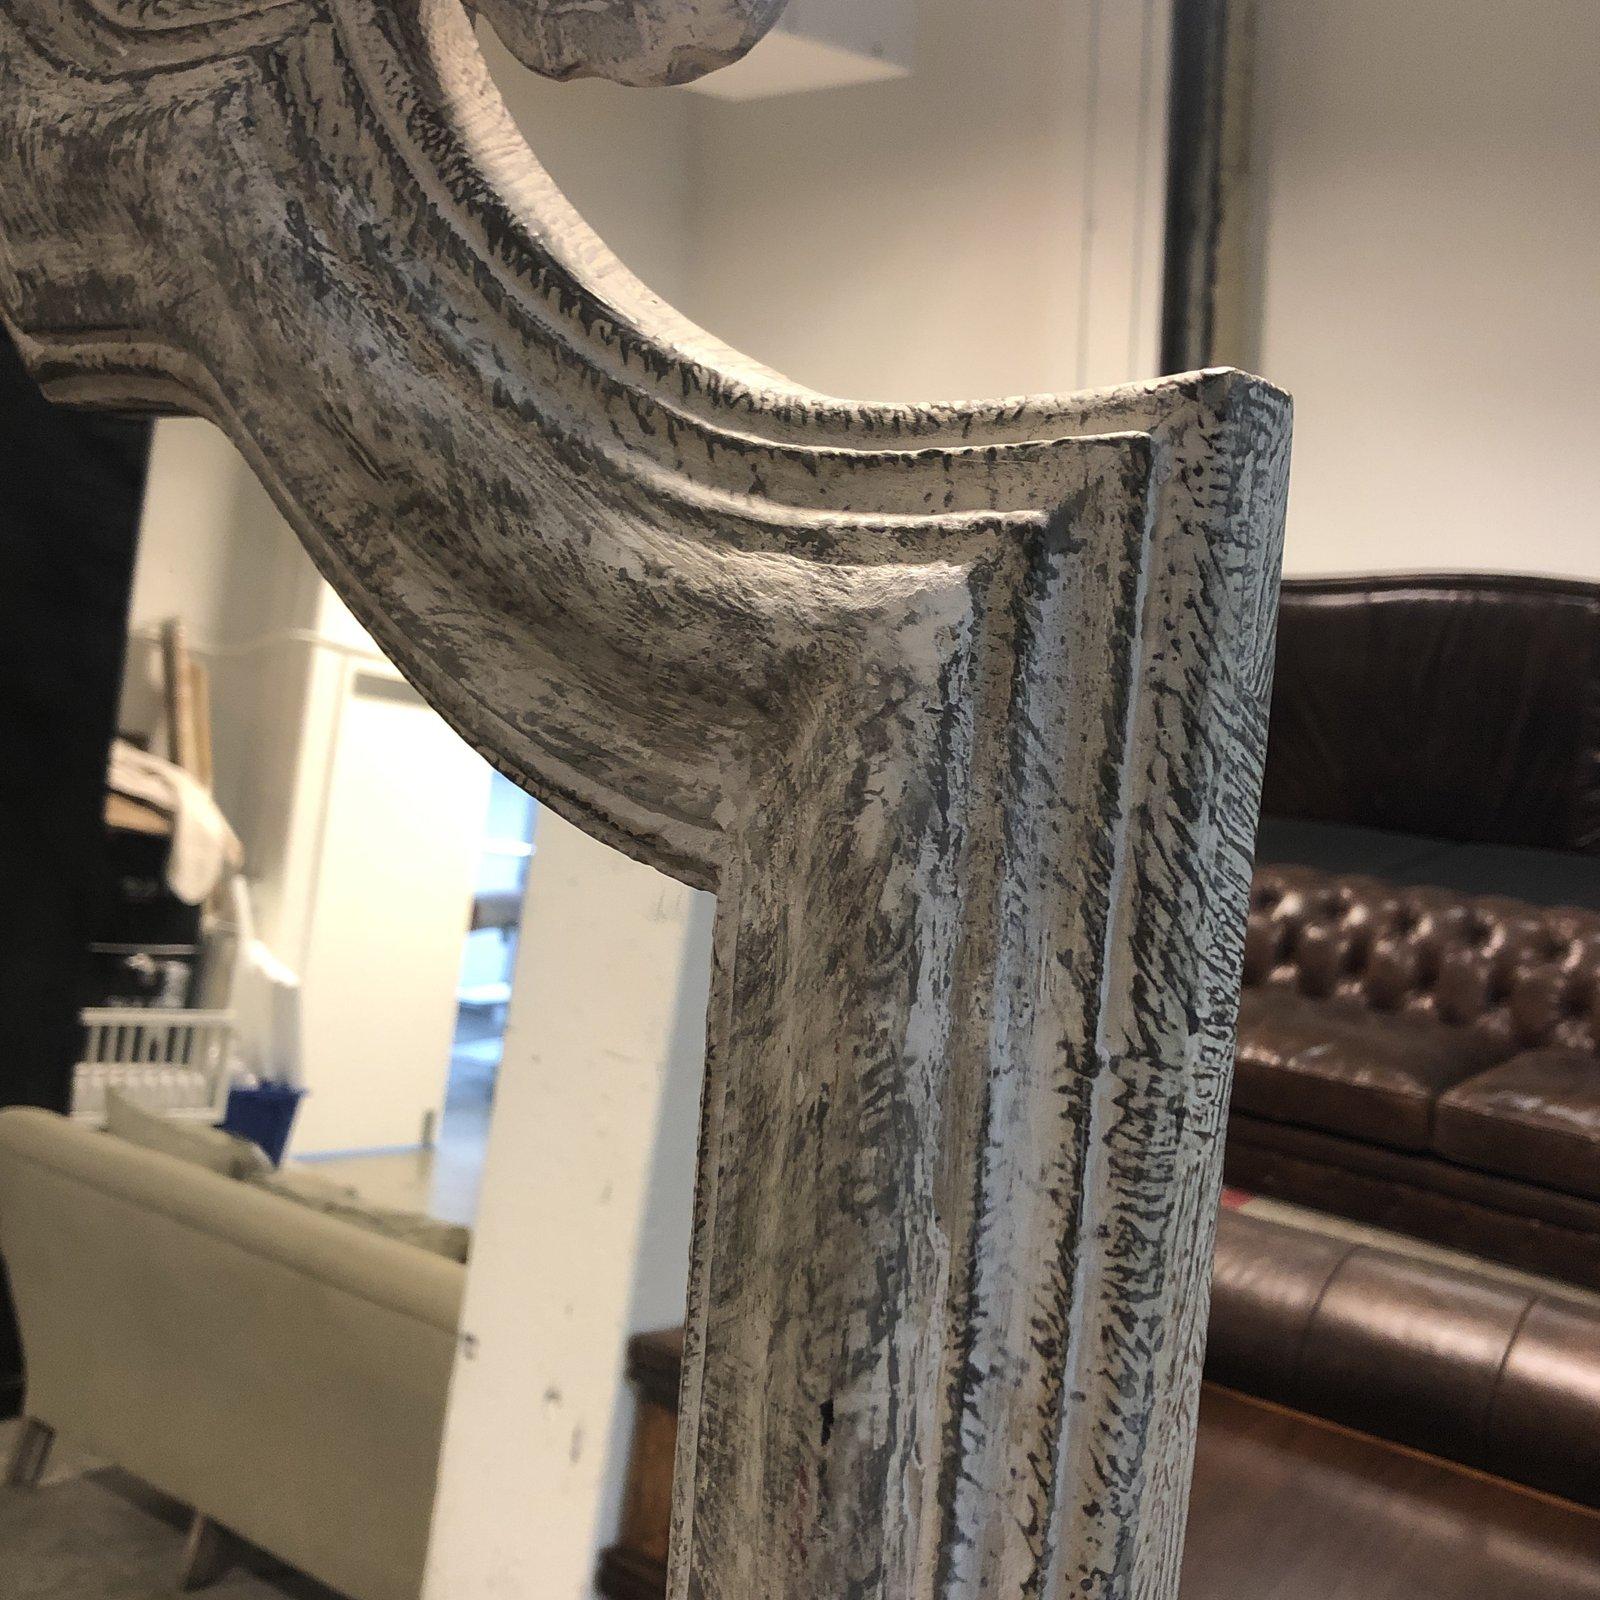 A Maison Grande Louis XIV Floor Mirror. Designed by Tara Shaw for Restoration Hardware. The crown can be removed. A solid wood frame in a distressed taupe finish.

About Tara Shaw:
